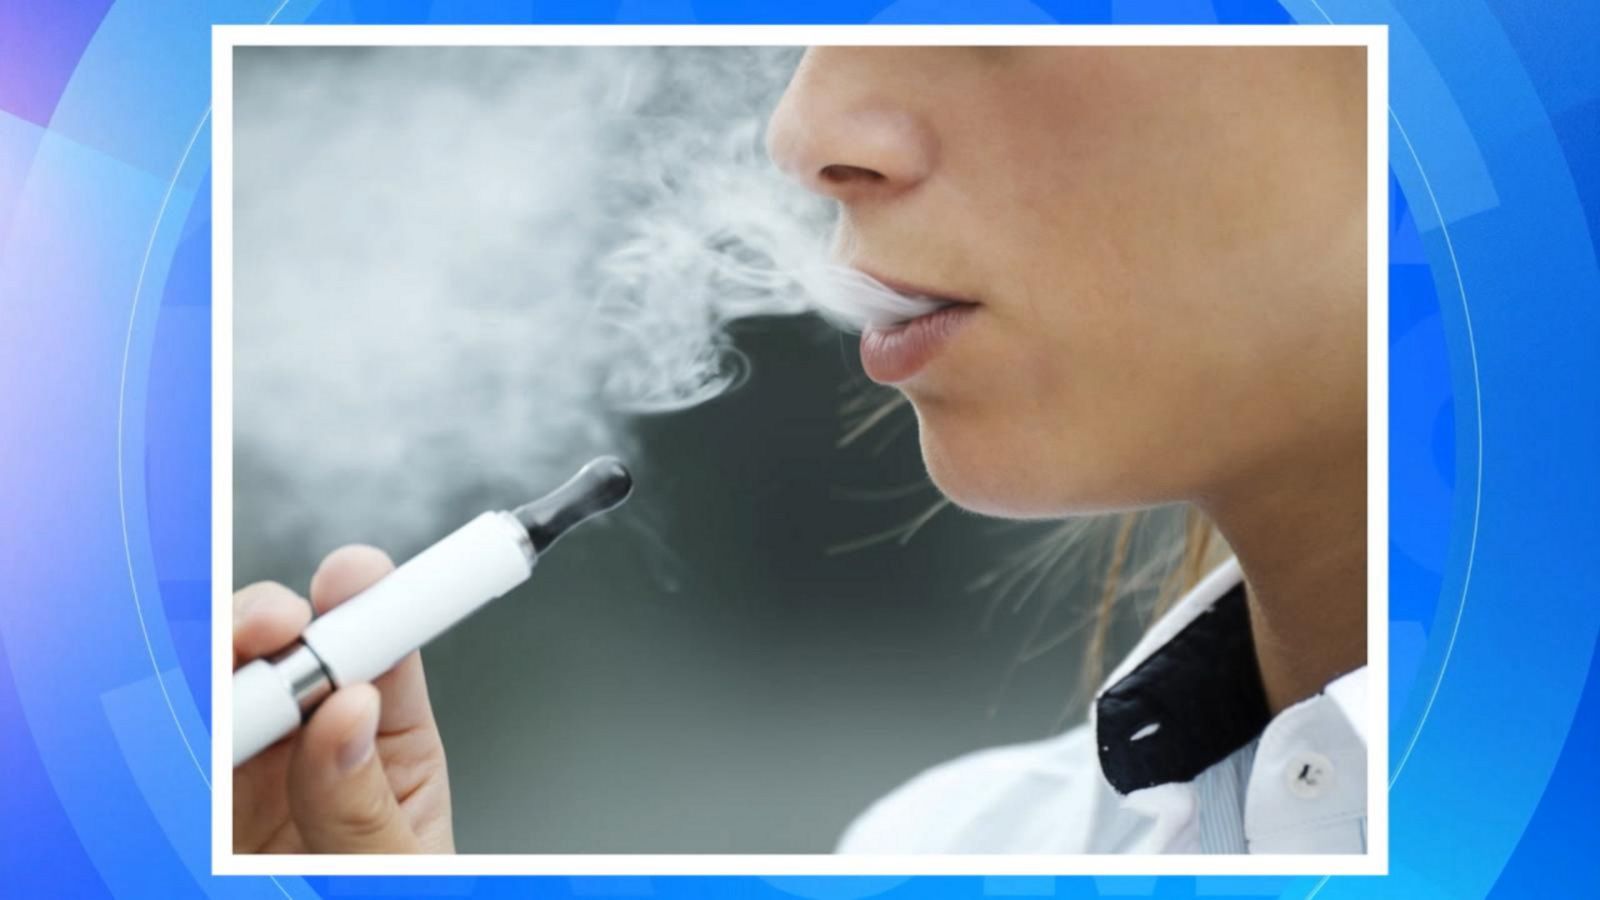 VIDEO: New study compares effects of smoking and vaping